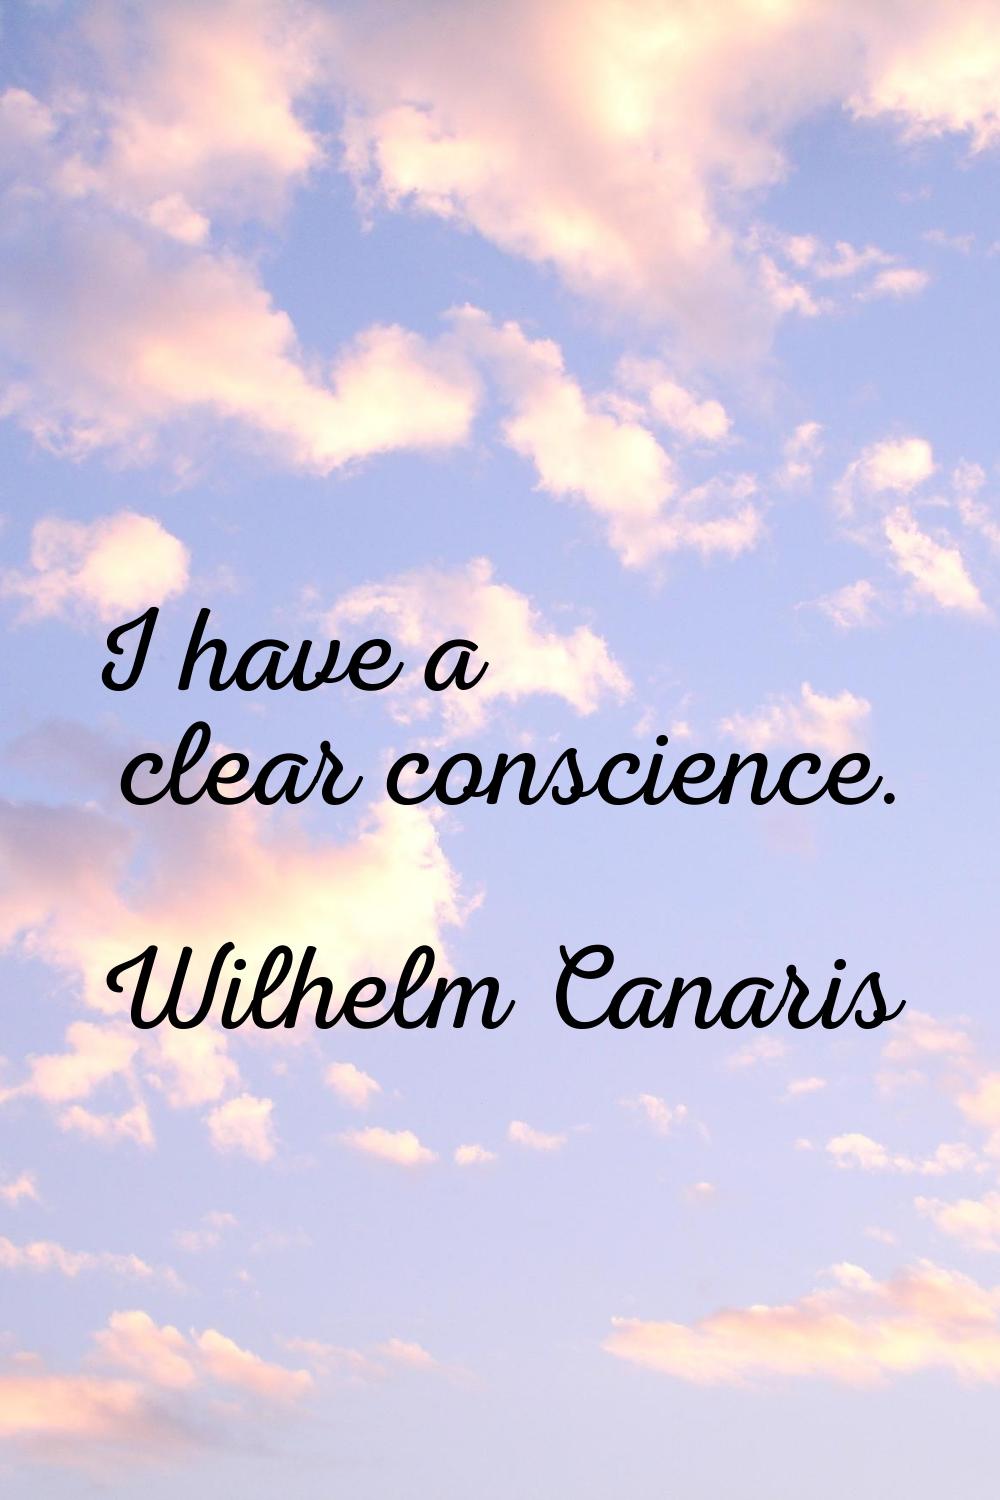 I have a clear conscience.